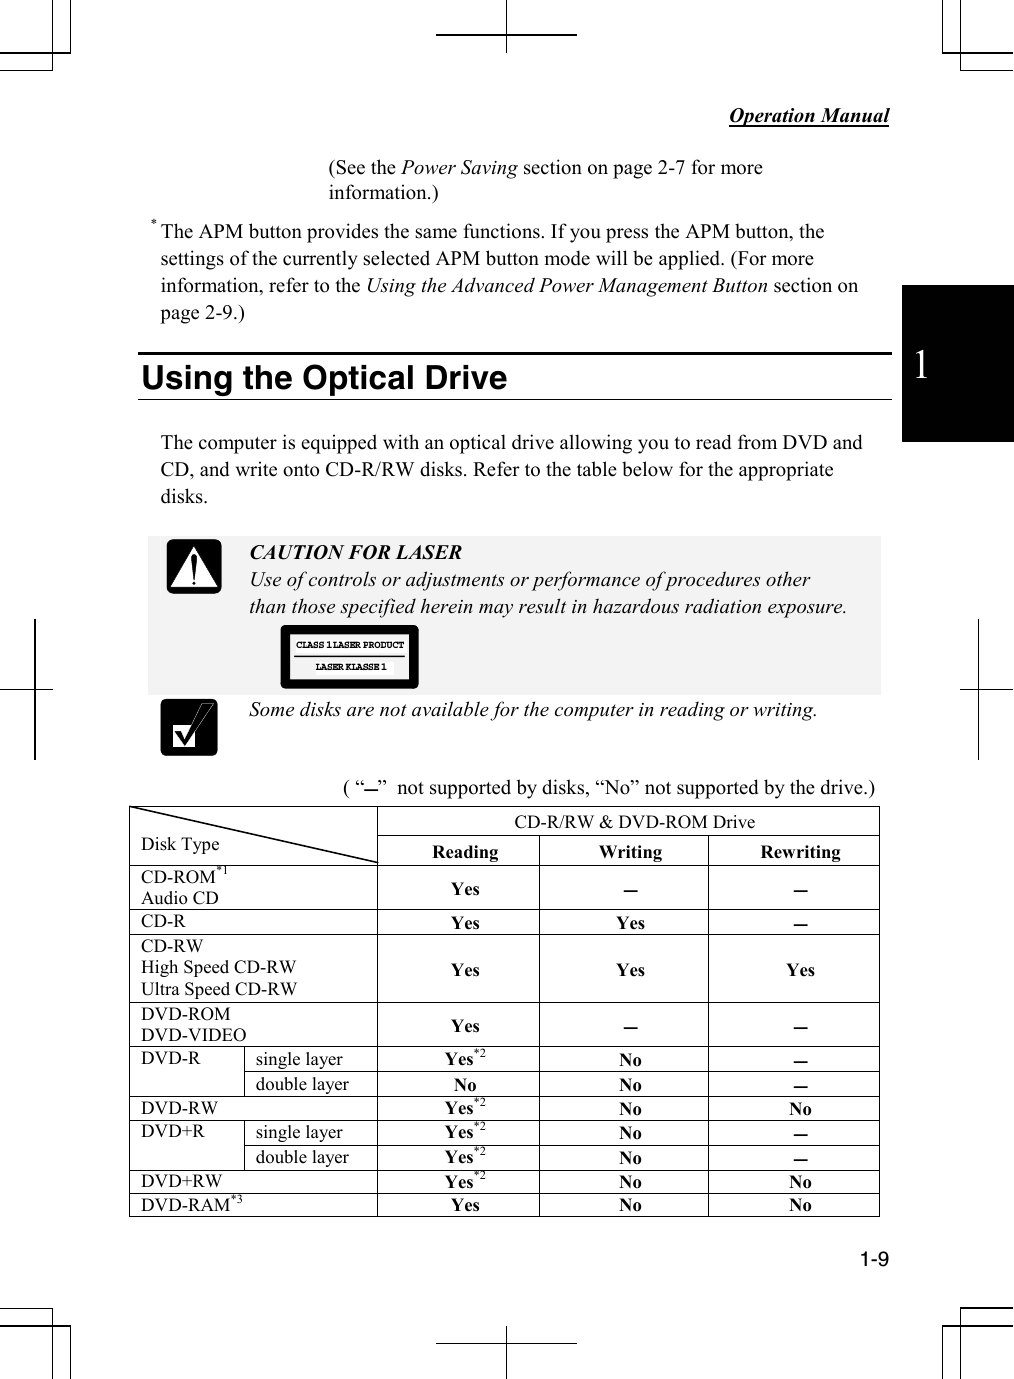           Operation Manual  1-9  1 (See the Power Saving section on page 2-7 for more information.) * The APM button provides the same functions. If you press the APM button, the settings of the currently selected APM button mode will be applied. (For more information, refer to the Using the Advanced Power Management Button section on page 2-9.)  Using the Optical Drive   The computer is equipped with an optical drive allowing you to read from DVD and CD, and write onto CD-R/RW disks. Refer to the table below for the appropriate disks.      CAUTION FOR LASER Use of controls or adjustments or performance of procedures other  than those specified herein may result in hazardous radiation exposure.       CLASS 1LASER PRODUCTLASER KLASSE 1  Some disks are not available for the computer in reading or writing.                                    ( “”  not supported by disks, “No” not supported by the drive.)  CD-R/RW &amp; DVD-ROM Drive  Disk Type  Reading Writing Rewriting CD-ROM*1 Audio CD  Yes    CD-R  Yes Yes   CD-RW High Speed CD-RW  Ultra Speed CD-RW Yes Yes  Yes DVD-ROM DVD-VIDEO  Yes    single layer  Yes*2 No   DVD-R double layer  No No   DVD-RW  Yes*2 No No single layer  Yes*2  No   DVD+R double layer  Yes*2 No   DVD+RW  Yes*2 No No DVD-RAM*3 Yes No  No  